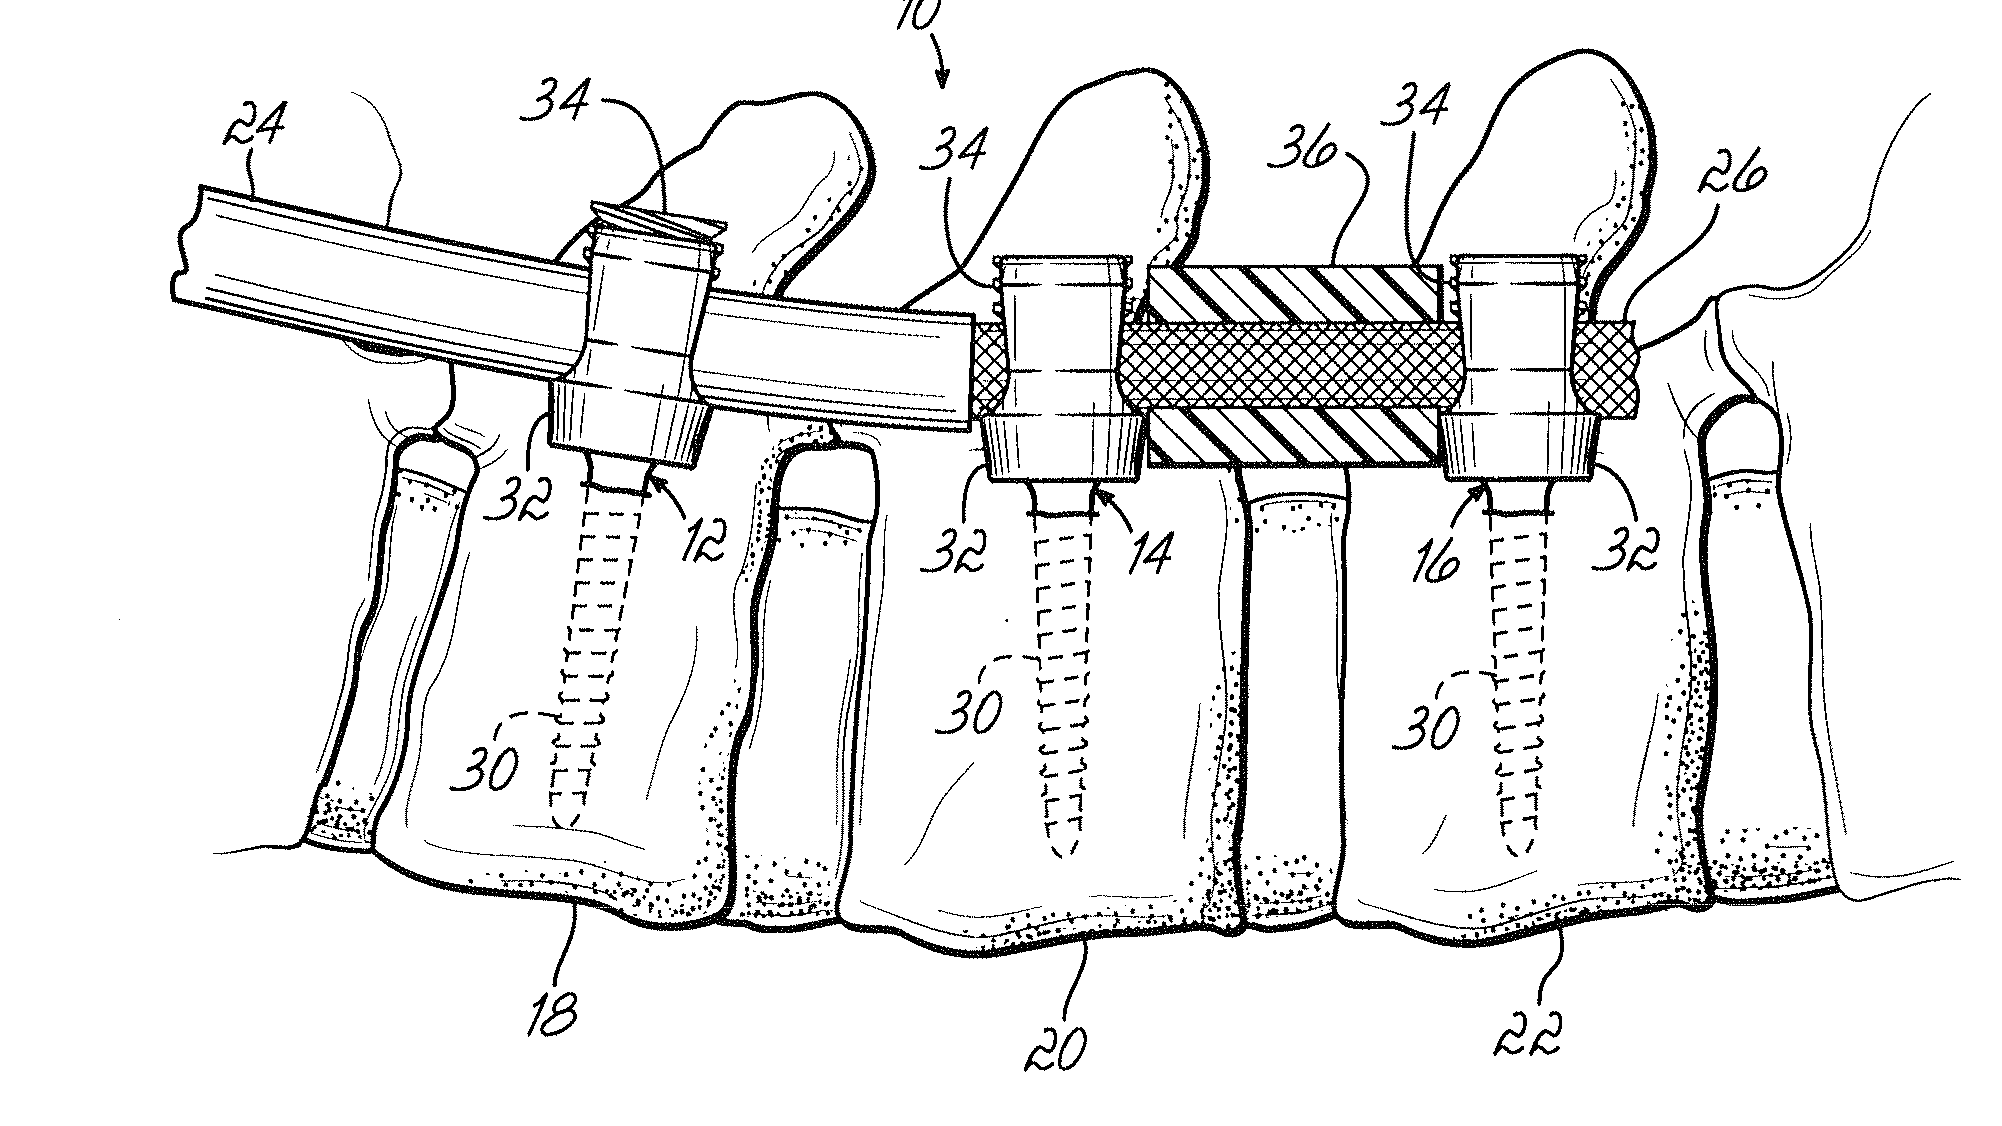 Spinal stabilization system with rigid and flexible elements